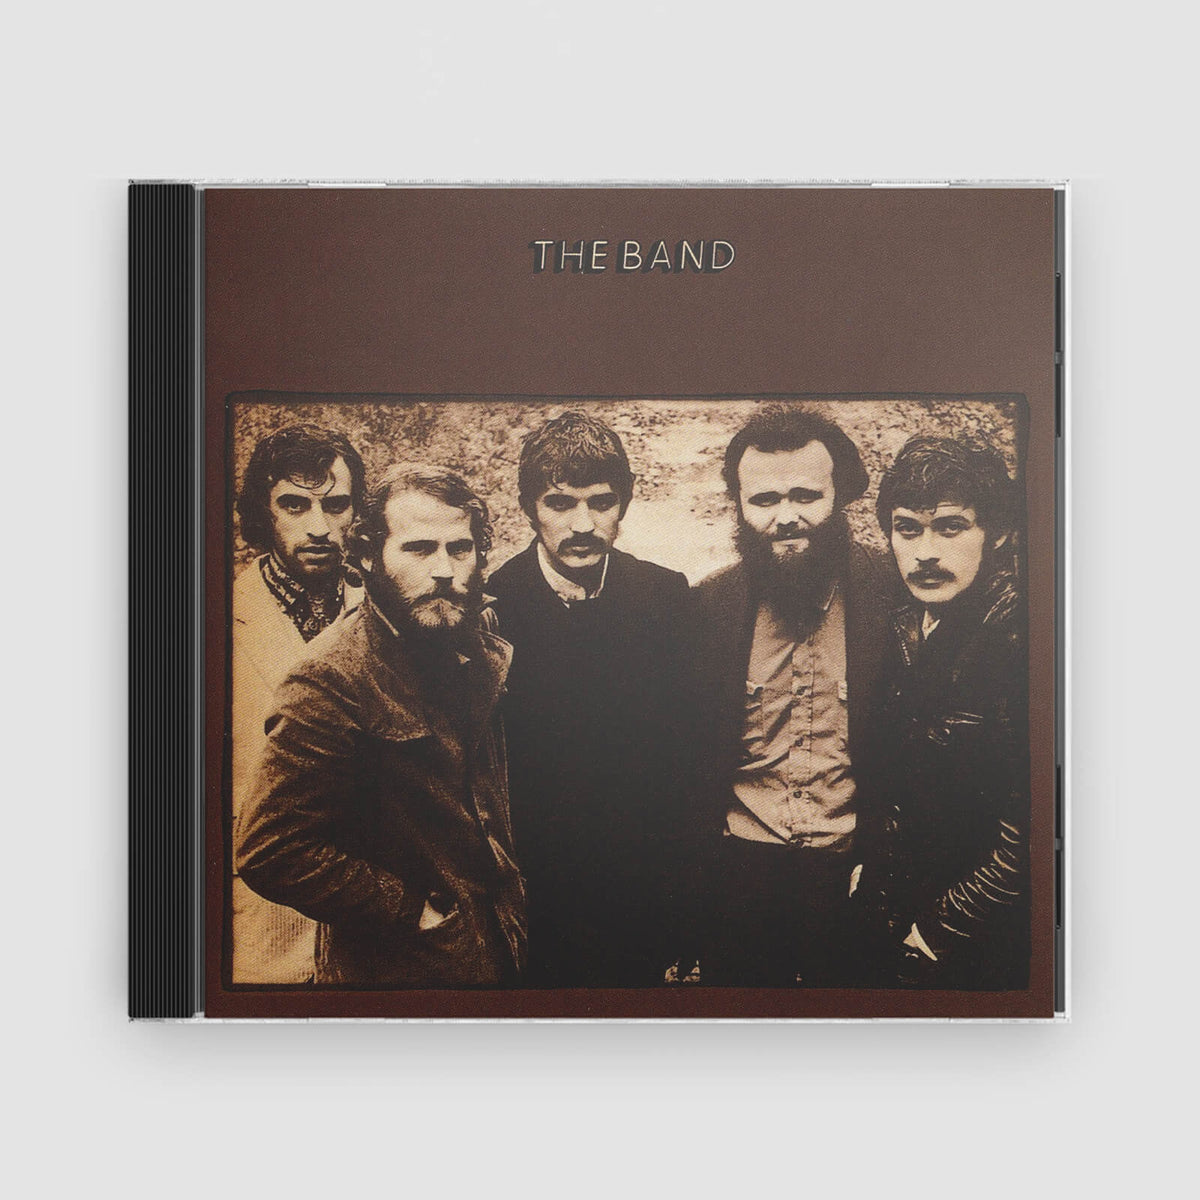 The Band : THE BAND